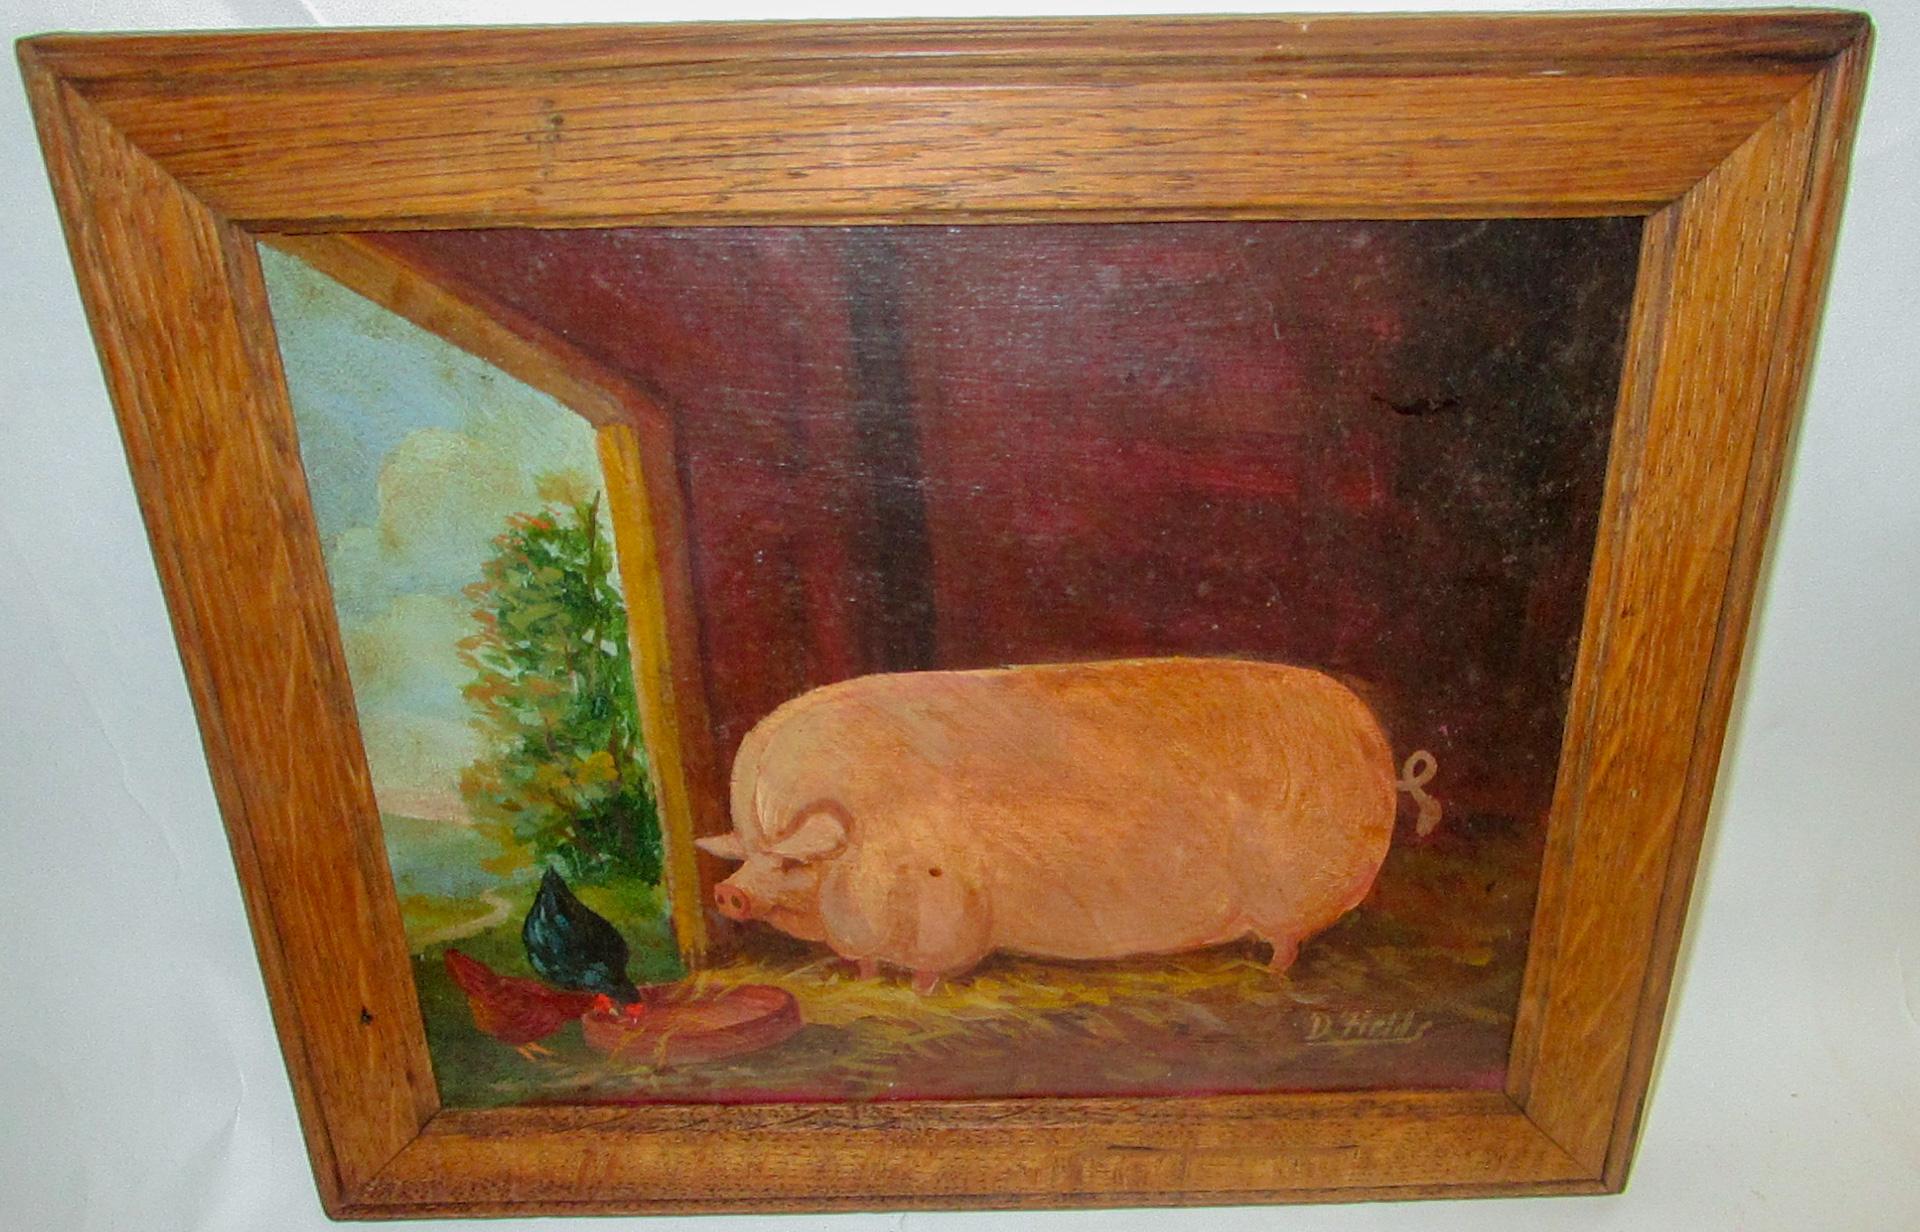 Painted Primitive English Original Oil Barnyard Scene Painting signed D'Fields